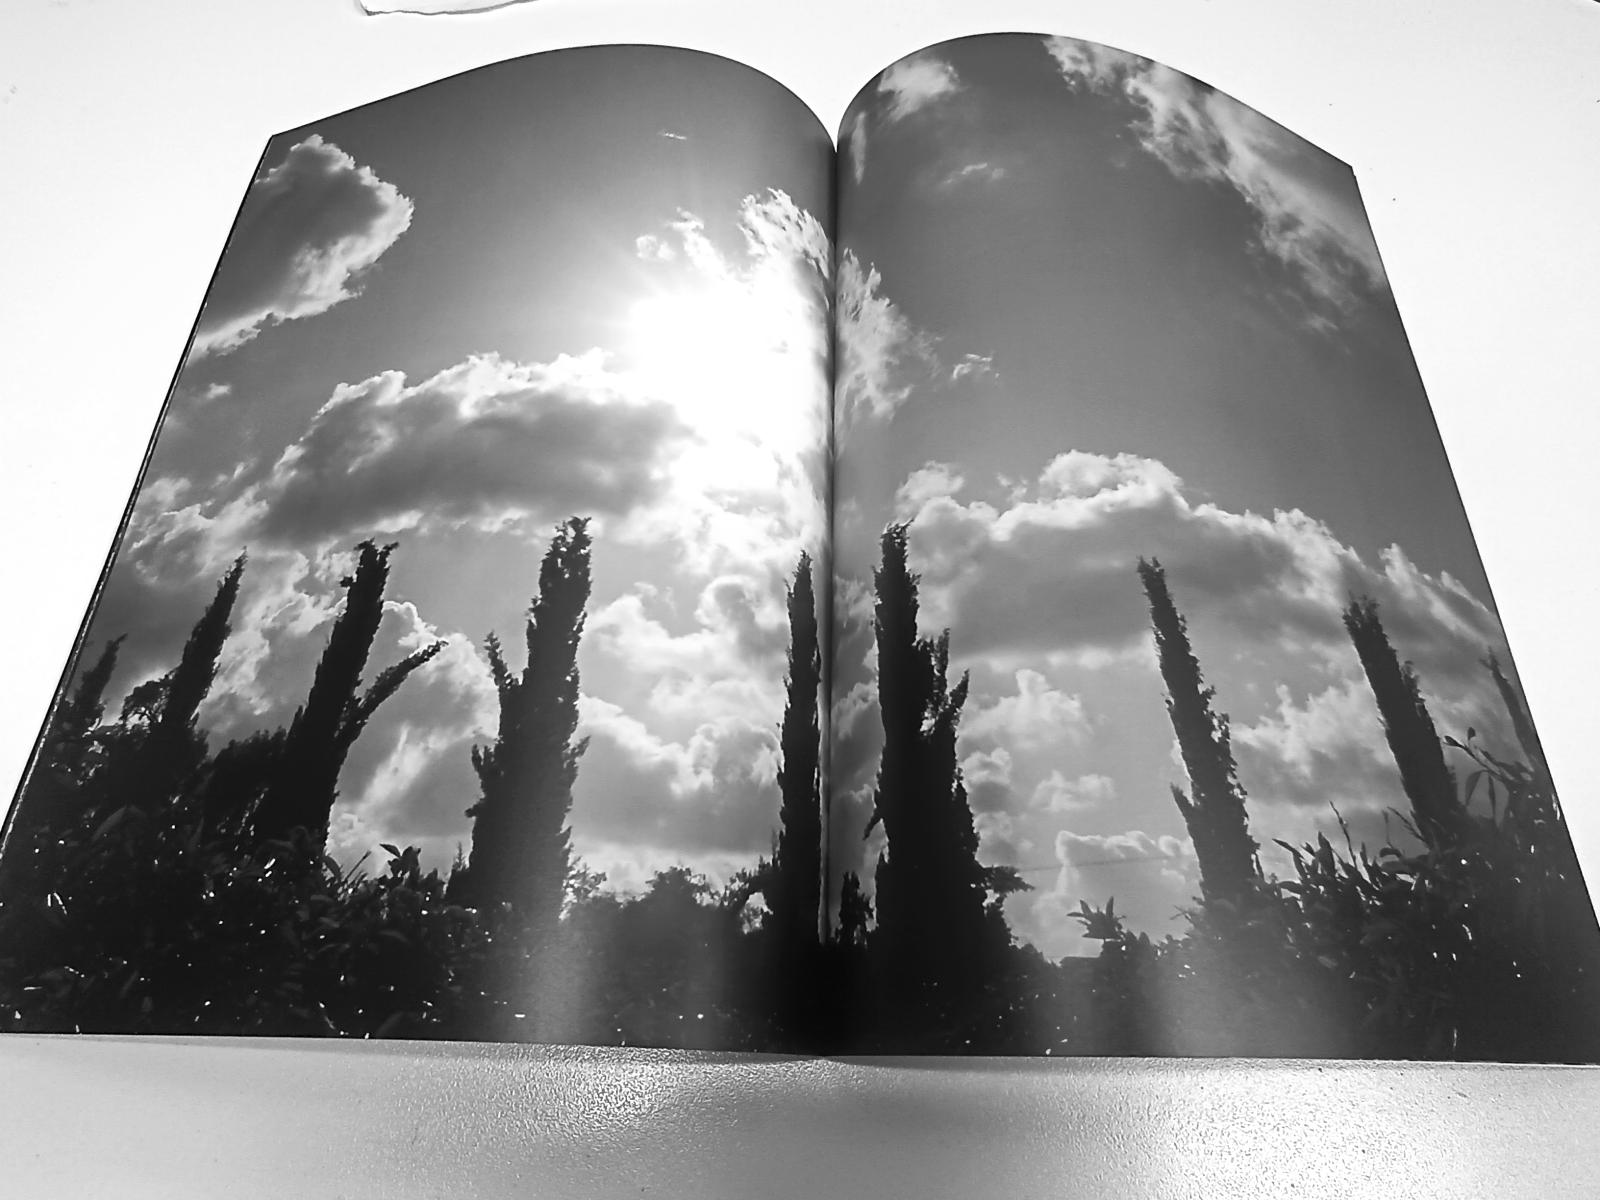 My third self-published photo book (this time a magazine) is available online in my Blurb site books portfolio. - 